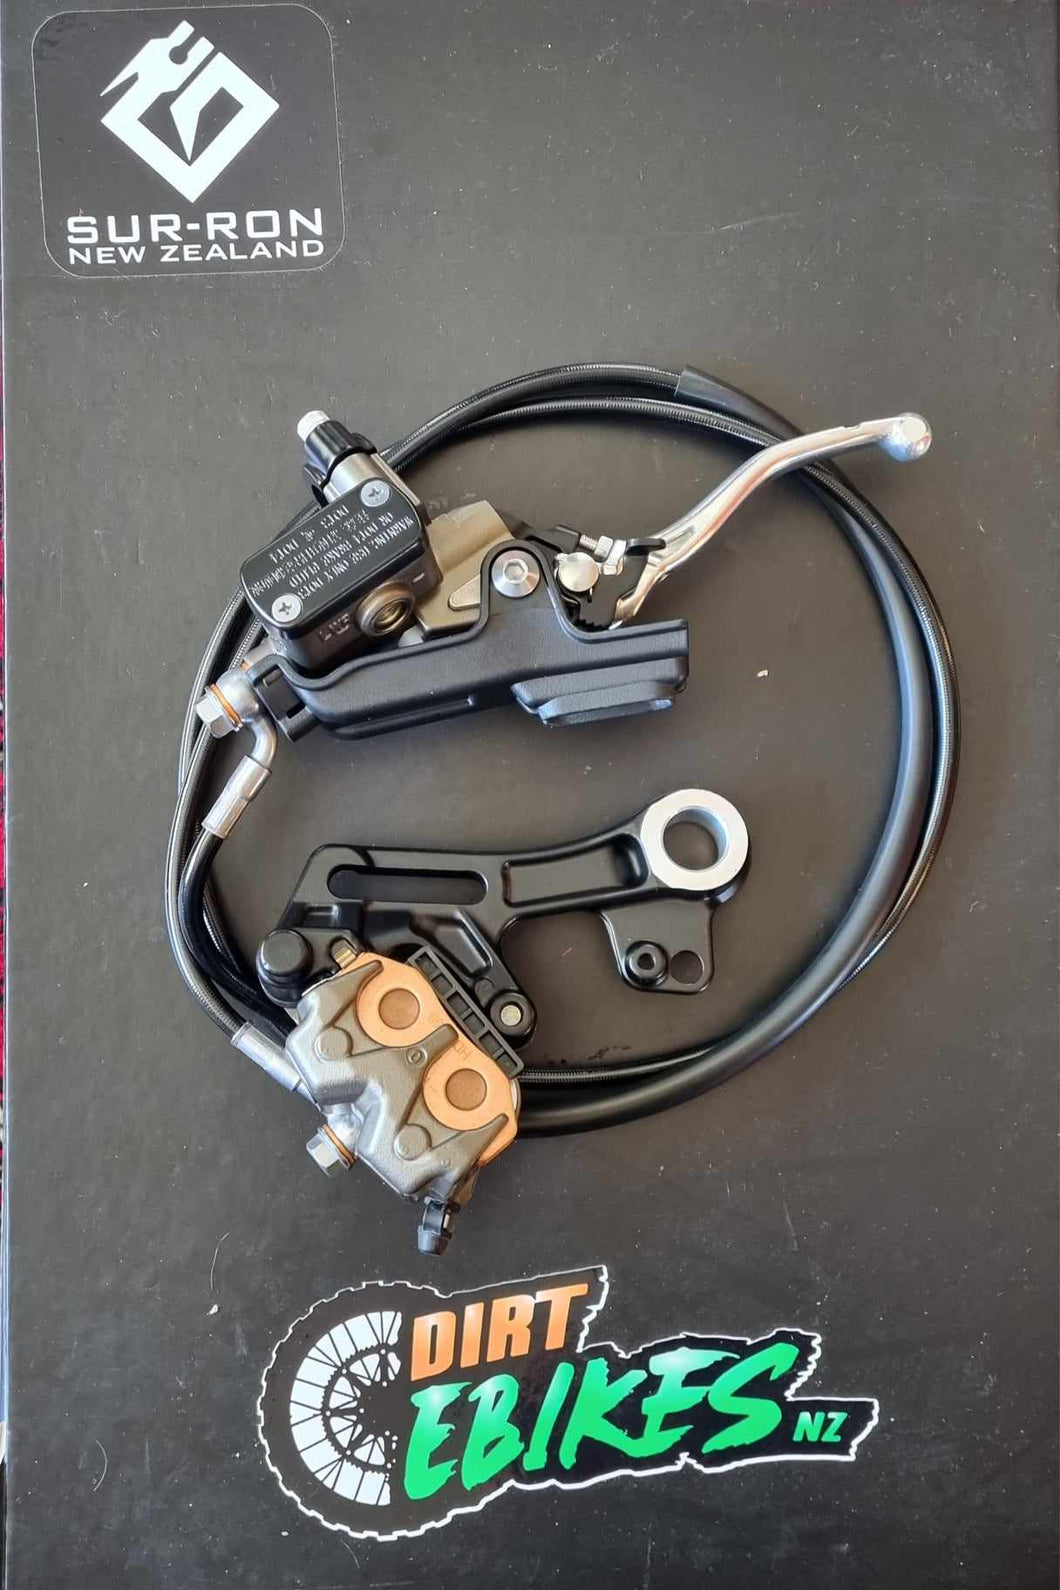 Ultra bee Complete Rear Brake Assembly